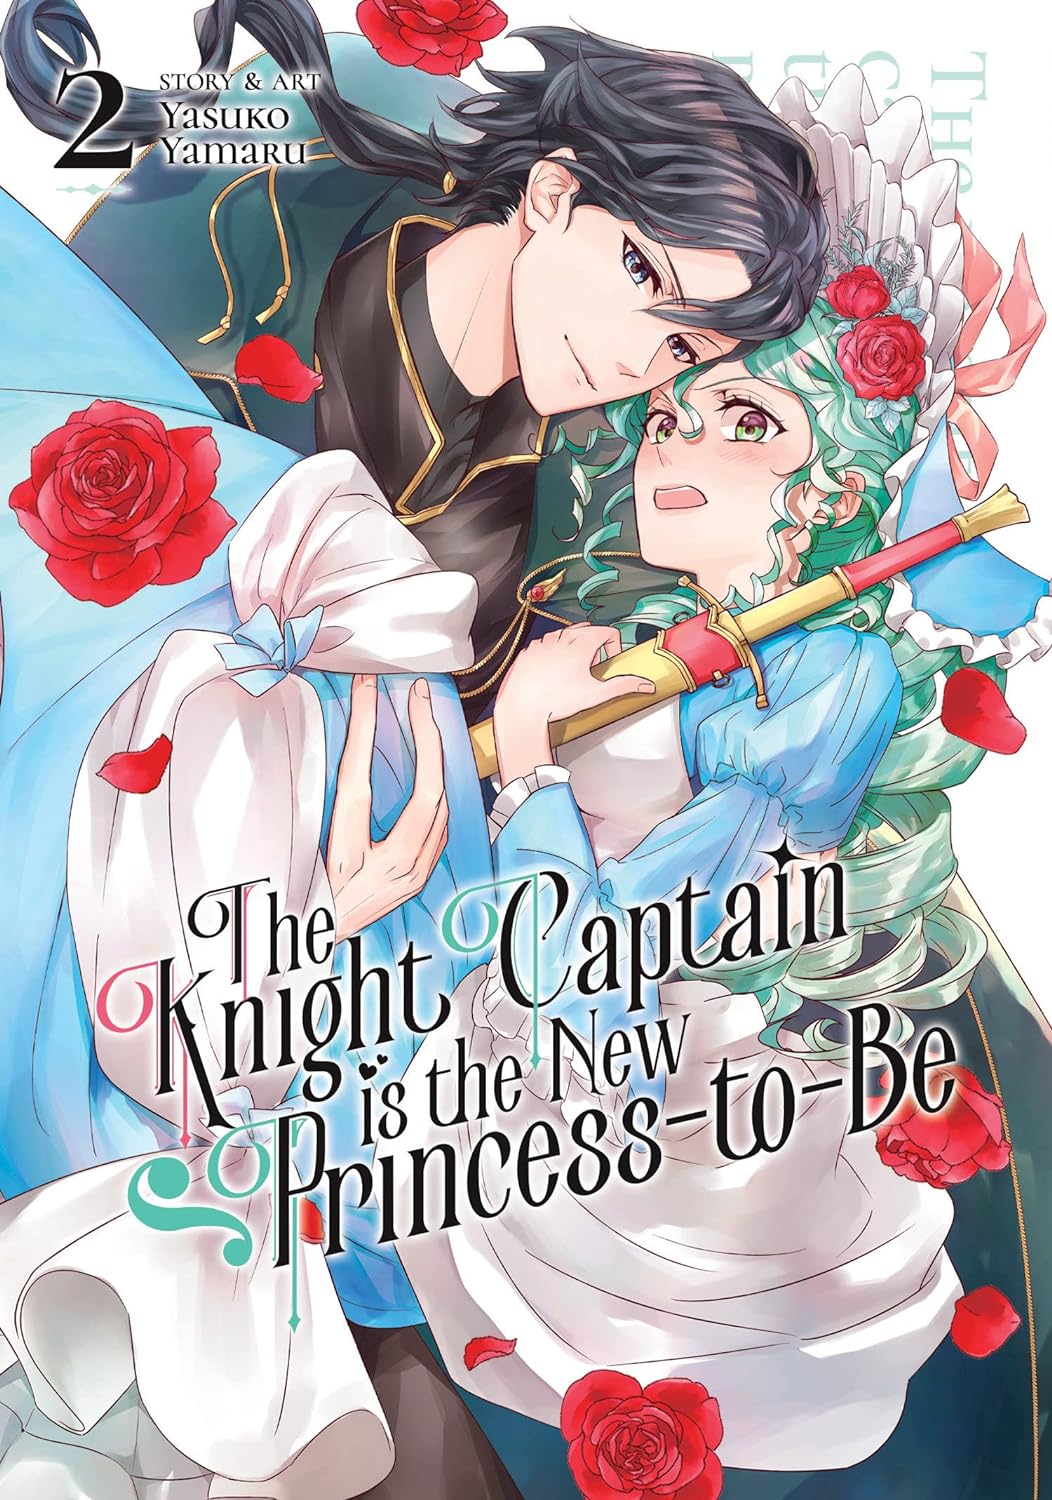 The Knight Captain Is the New Princess-To-Be Vol. 02